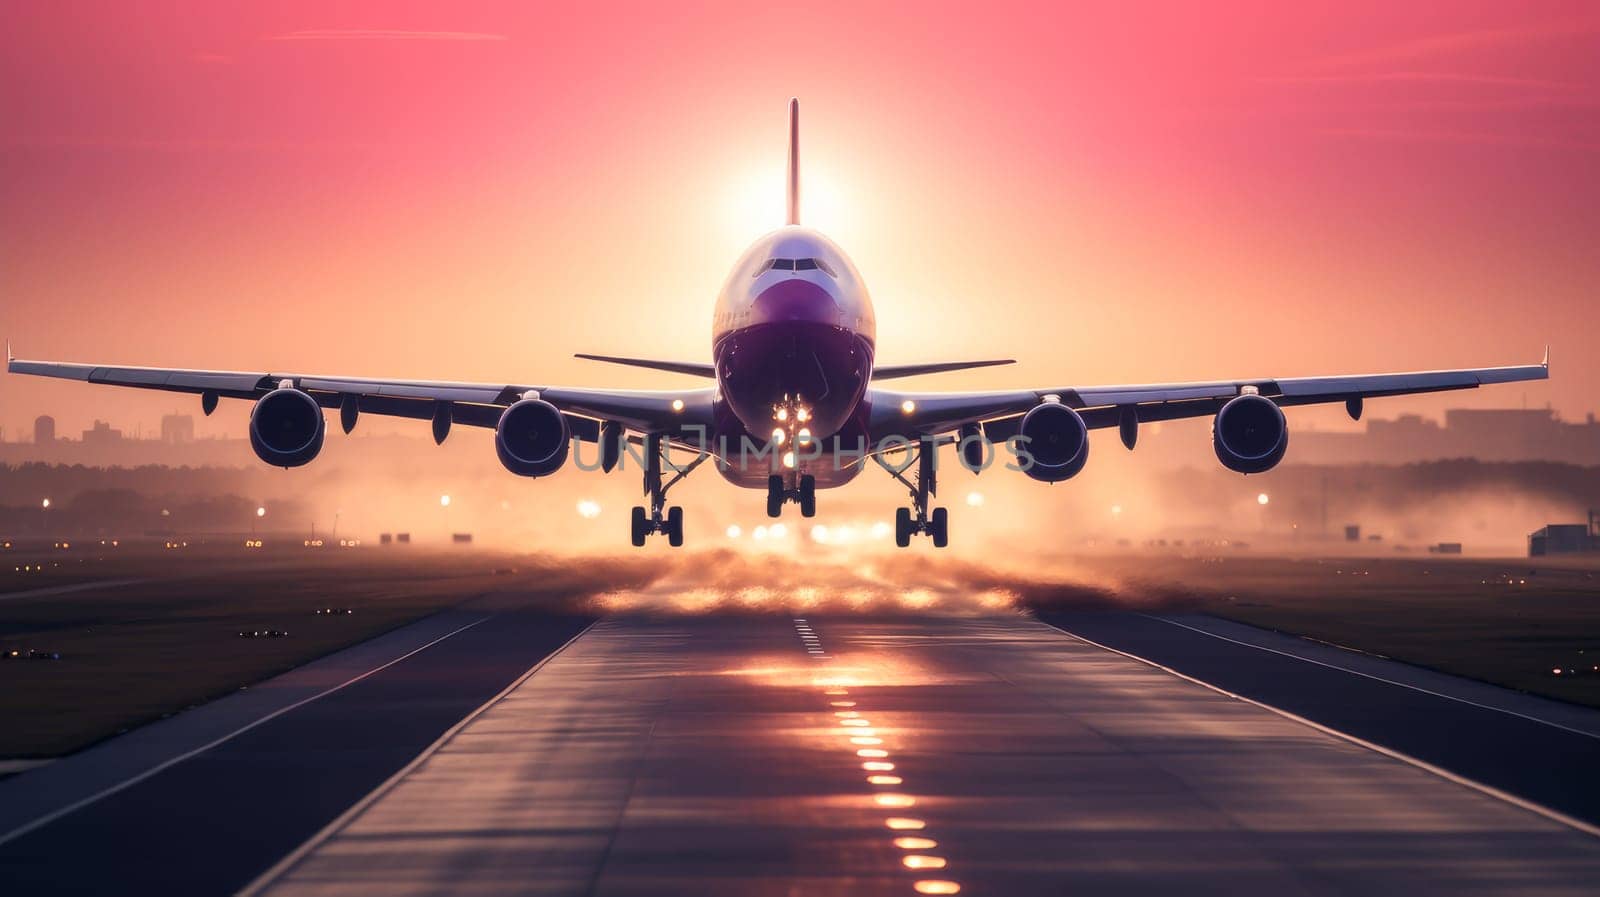 A passenger plane flying in the colorful sky. Aircraft takes off from the airport runway during the sunset. Beautiful landscape, picture, phone screensaver, copy space, advertising, travel agency, tourism, solitude with nature, without people